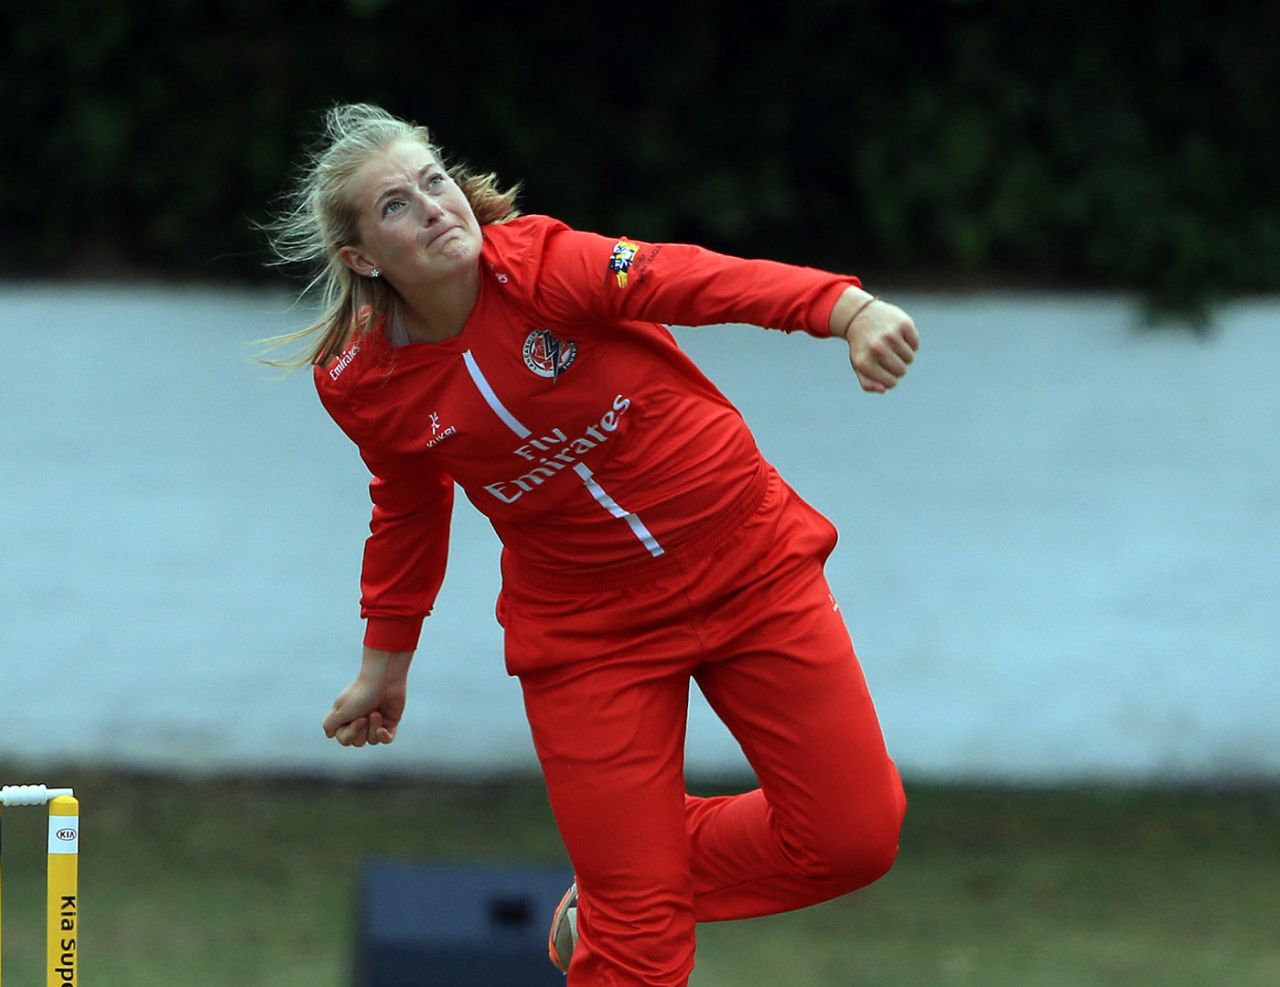 Sophie Ecclestone's four wickets earned victory but not a finals day place